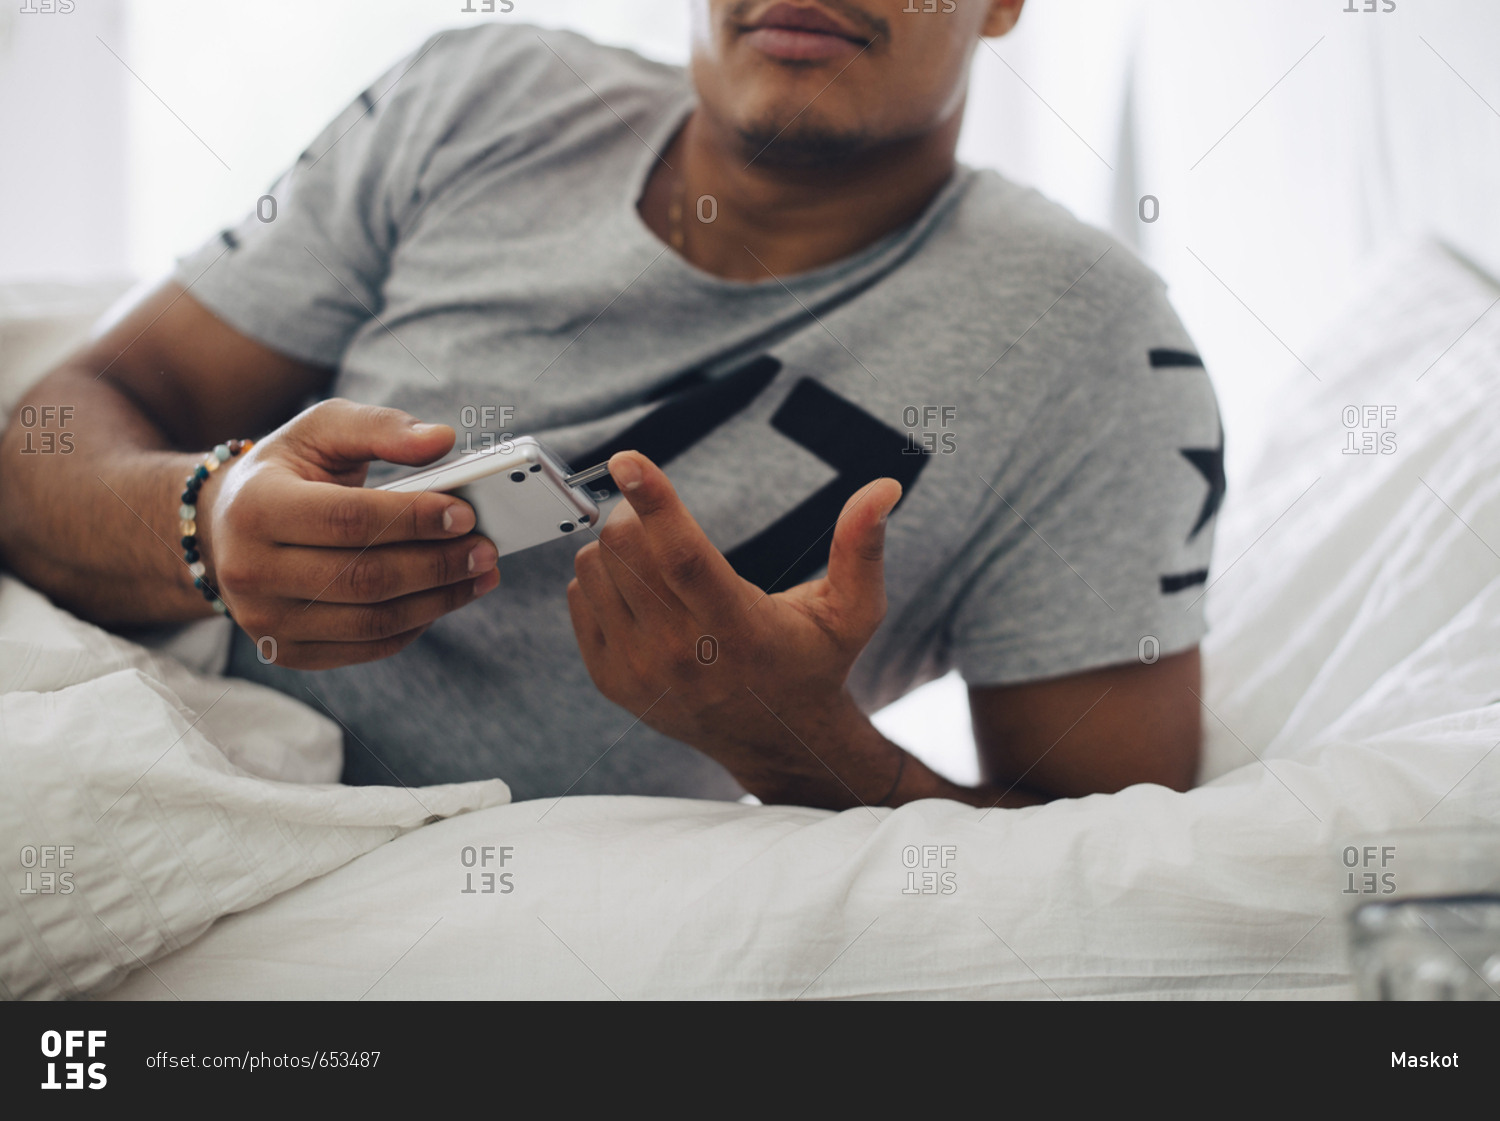 Midsection of man checking blood sugar level on glaucometer while lying on bed at home